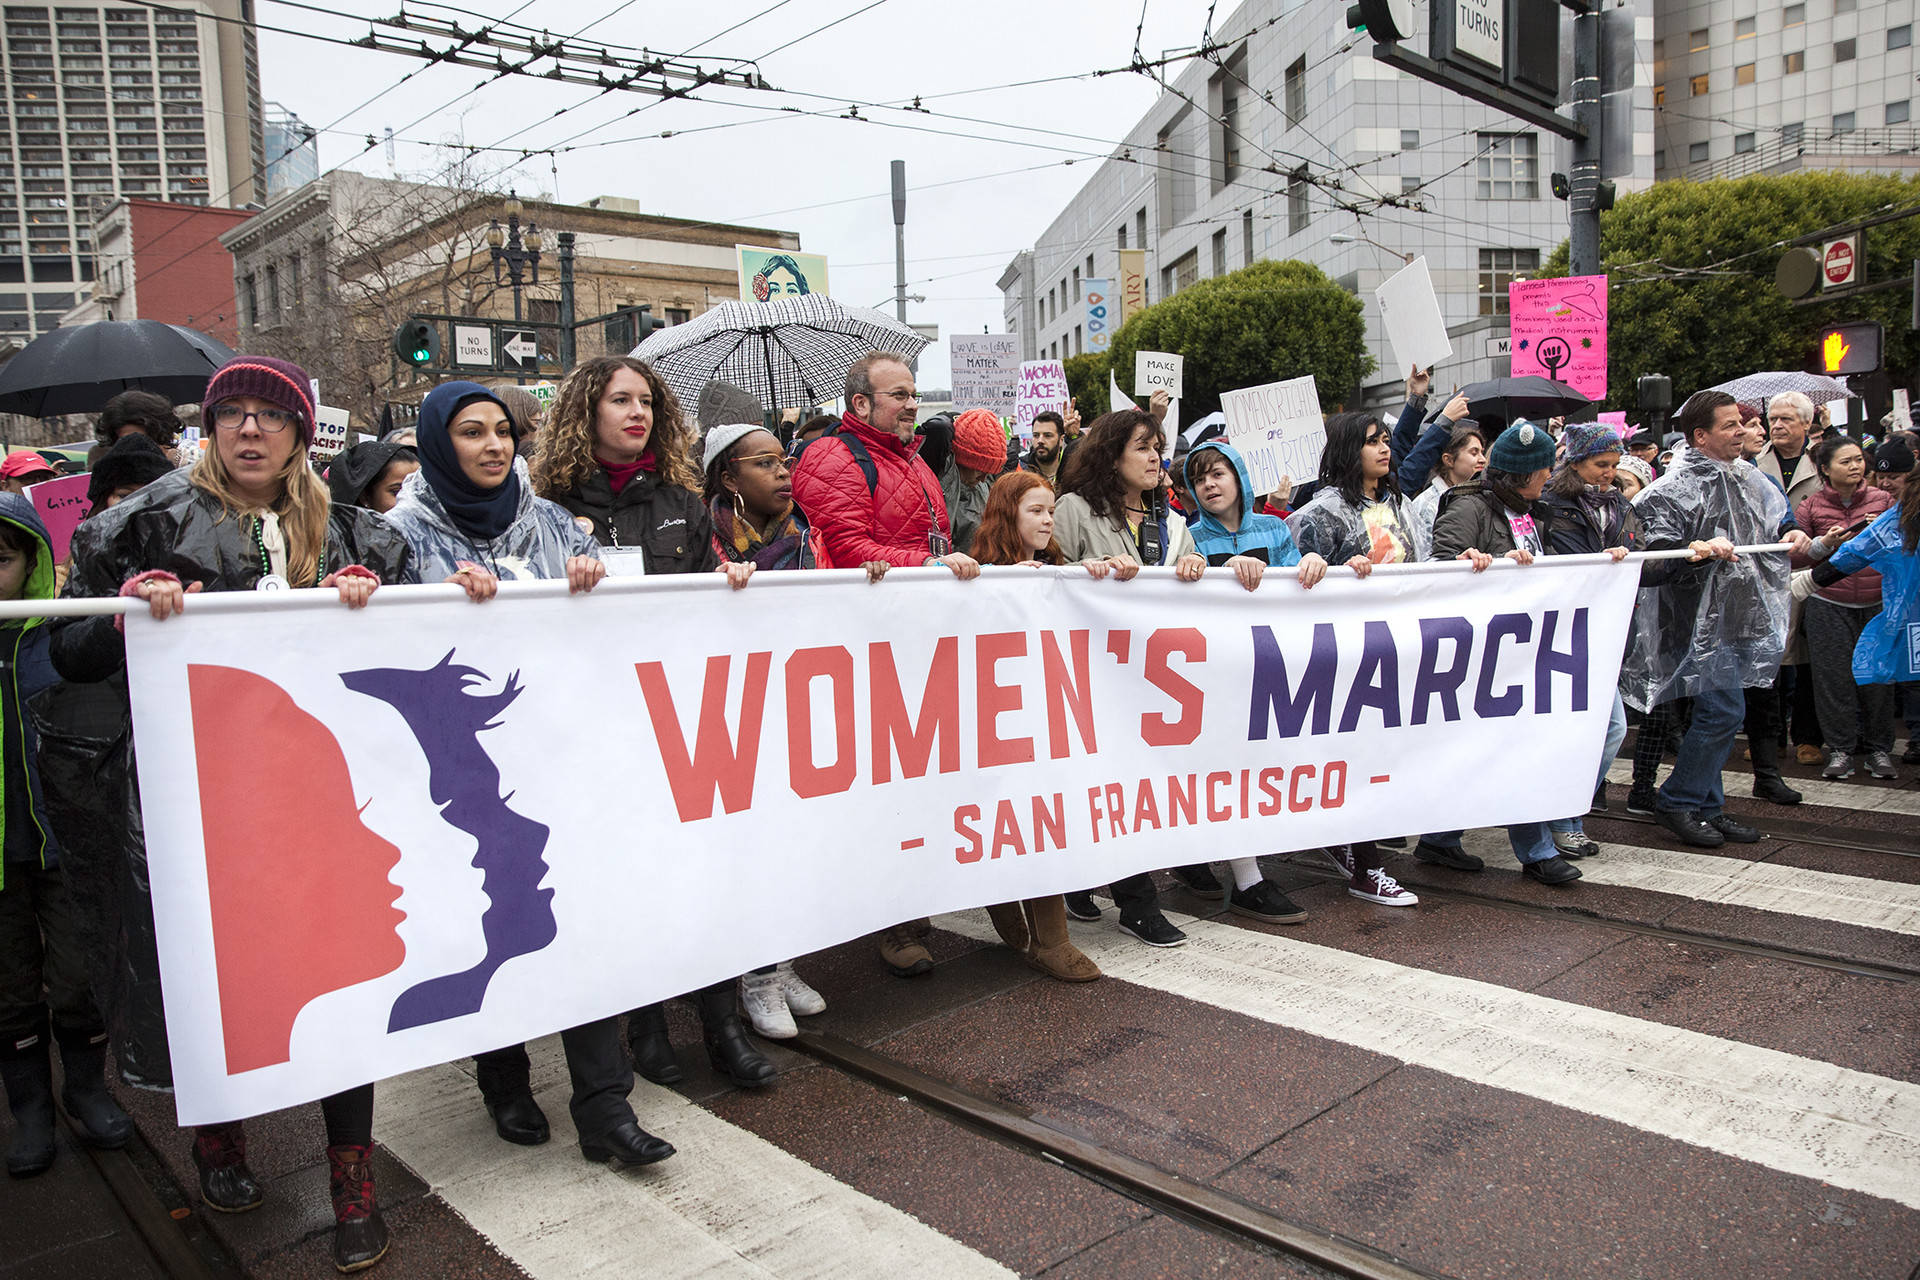 San Francisco’s Women’s March began at the Civic Center Plaza in San Francisco on Jan. 21, 2017. Even with looming clouds and rain thousands joined in the march down Market St. Brittany Hosea-Small/KQED